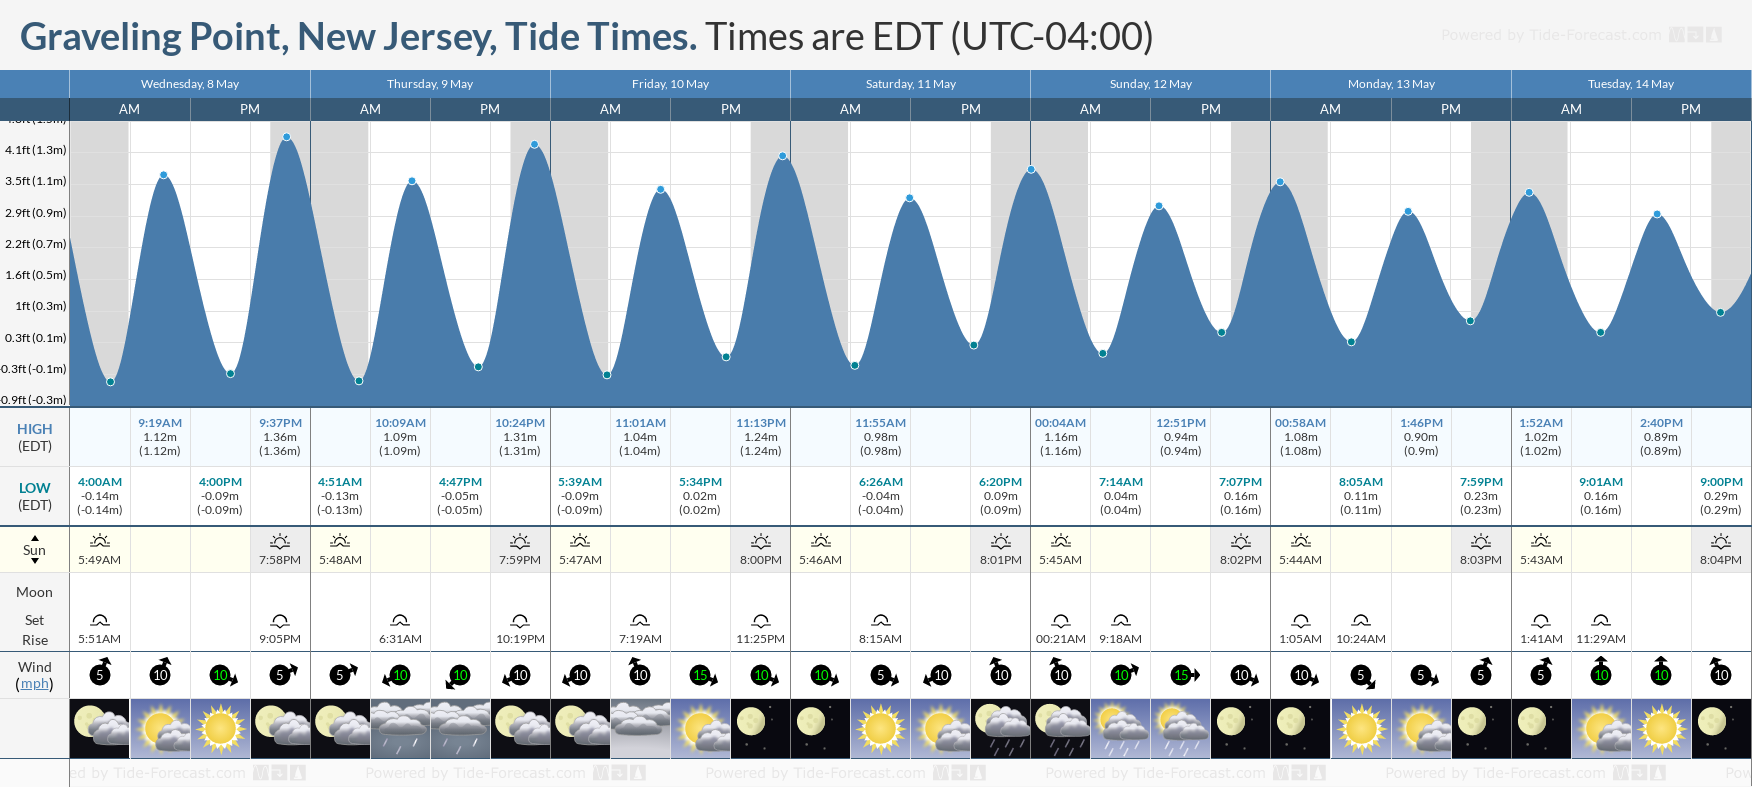 Graveling Point, New Jersey Tide Chart including high and low tide tide times for the next 7 days